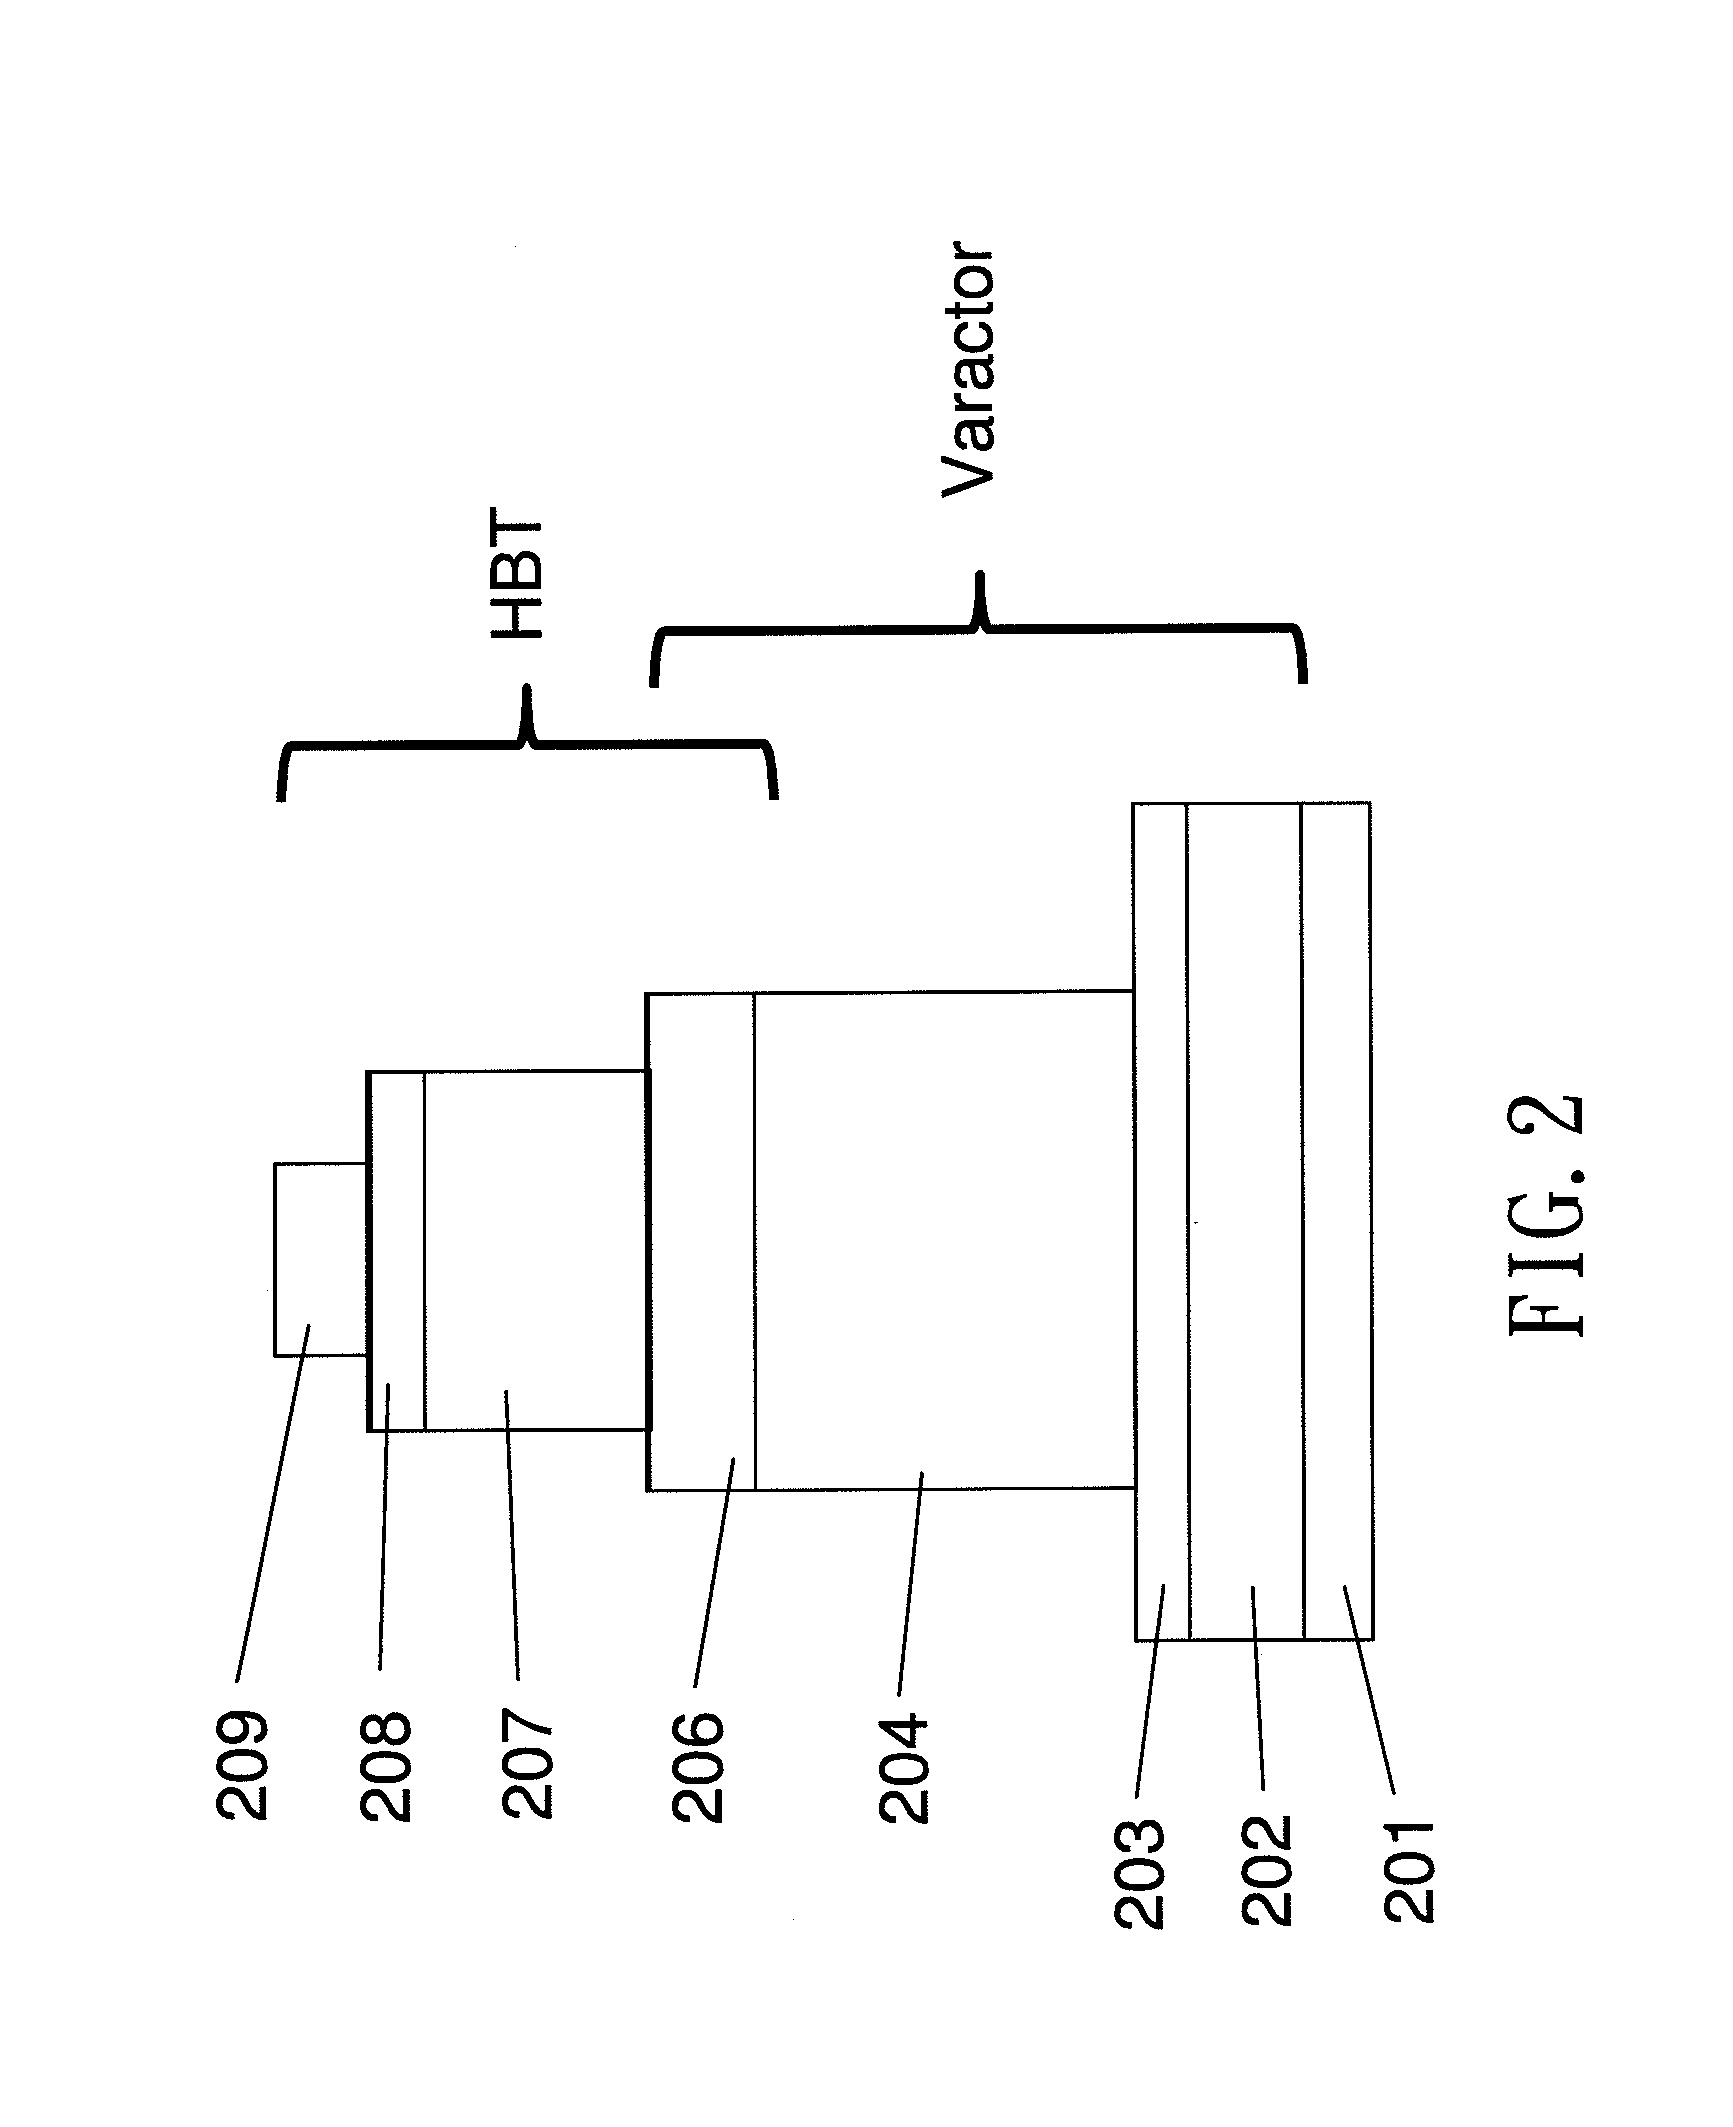 Integrated structure of compound semiconductor devices